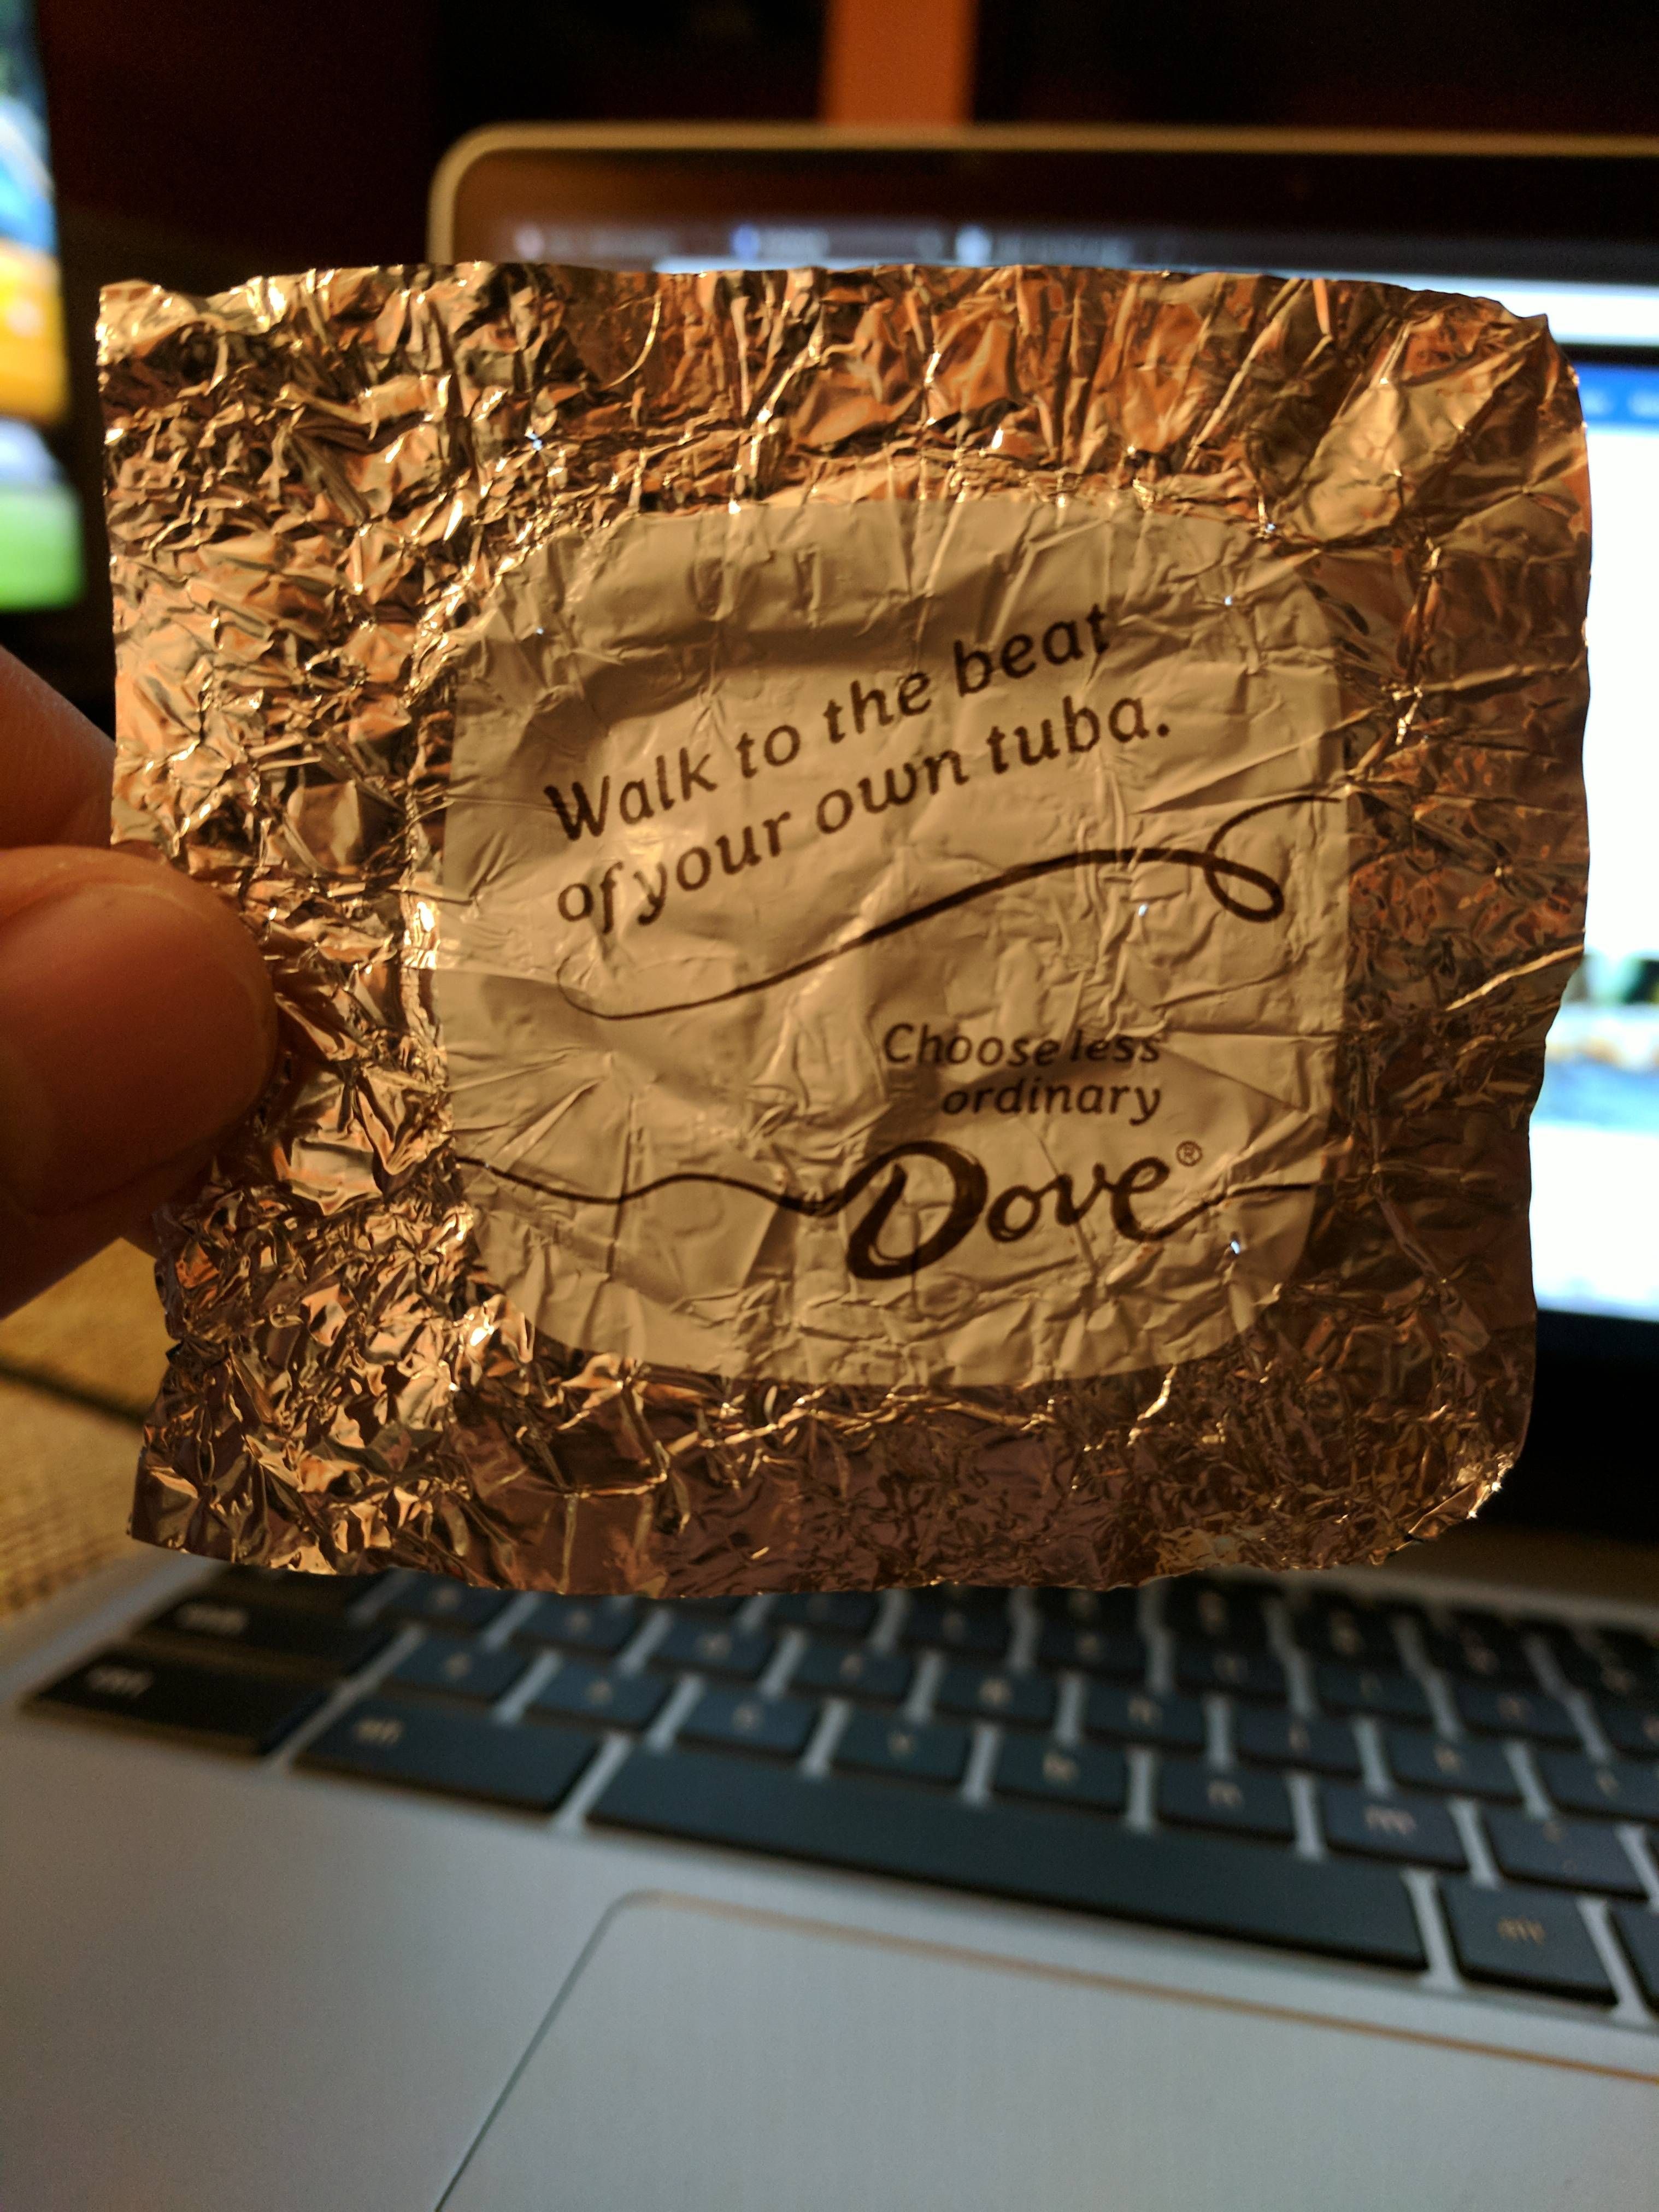 Did Dove just call me fat?